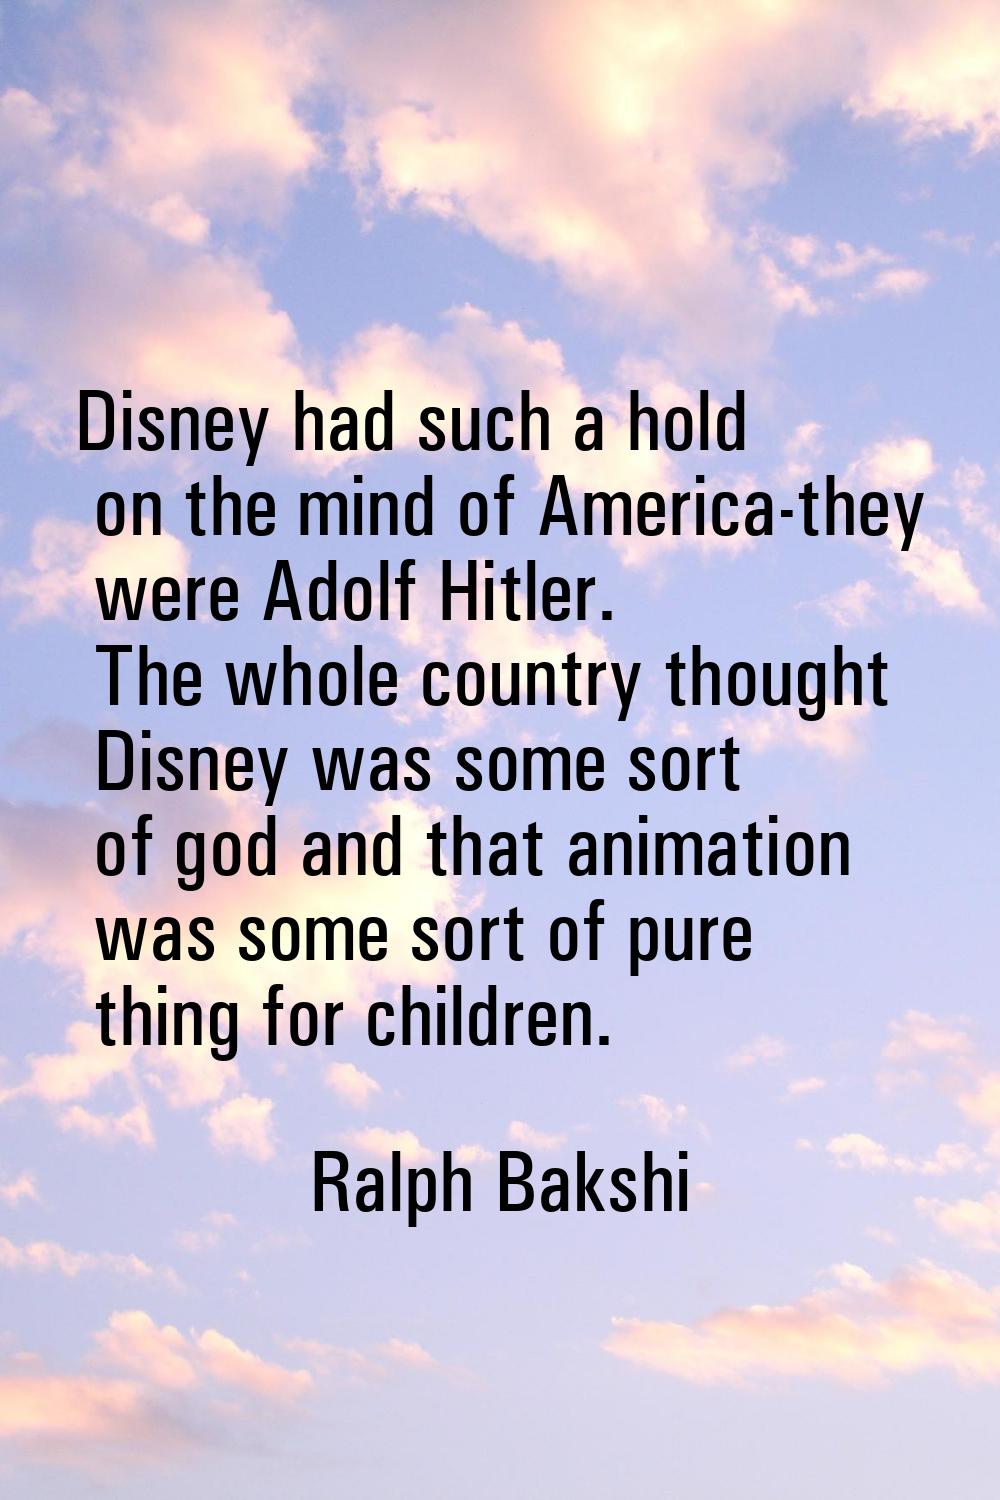 Disney had such a hold on the mind of America-they were Adolf Hitler. The whole country thought Dis